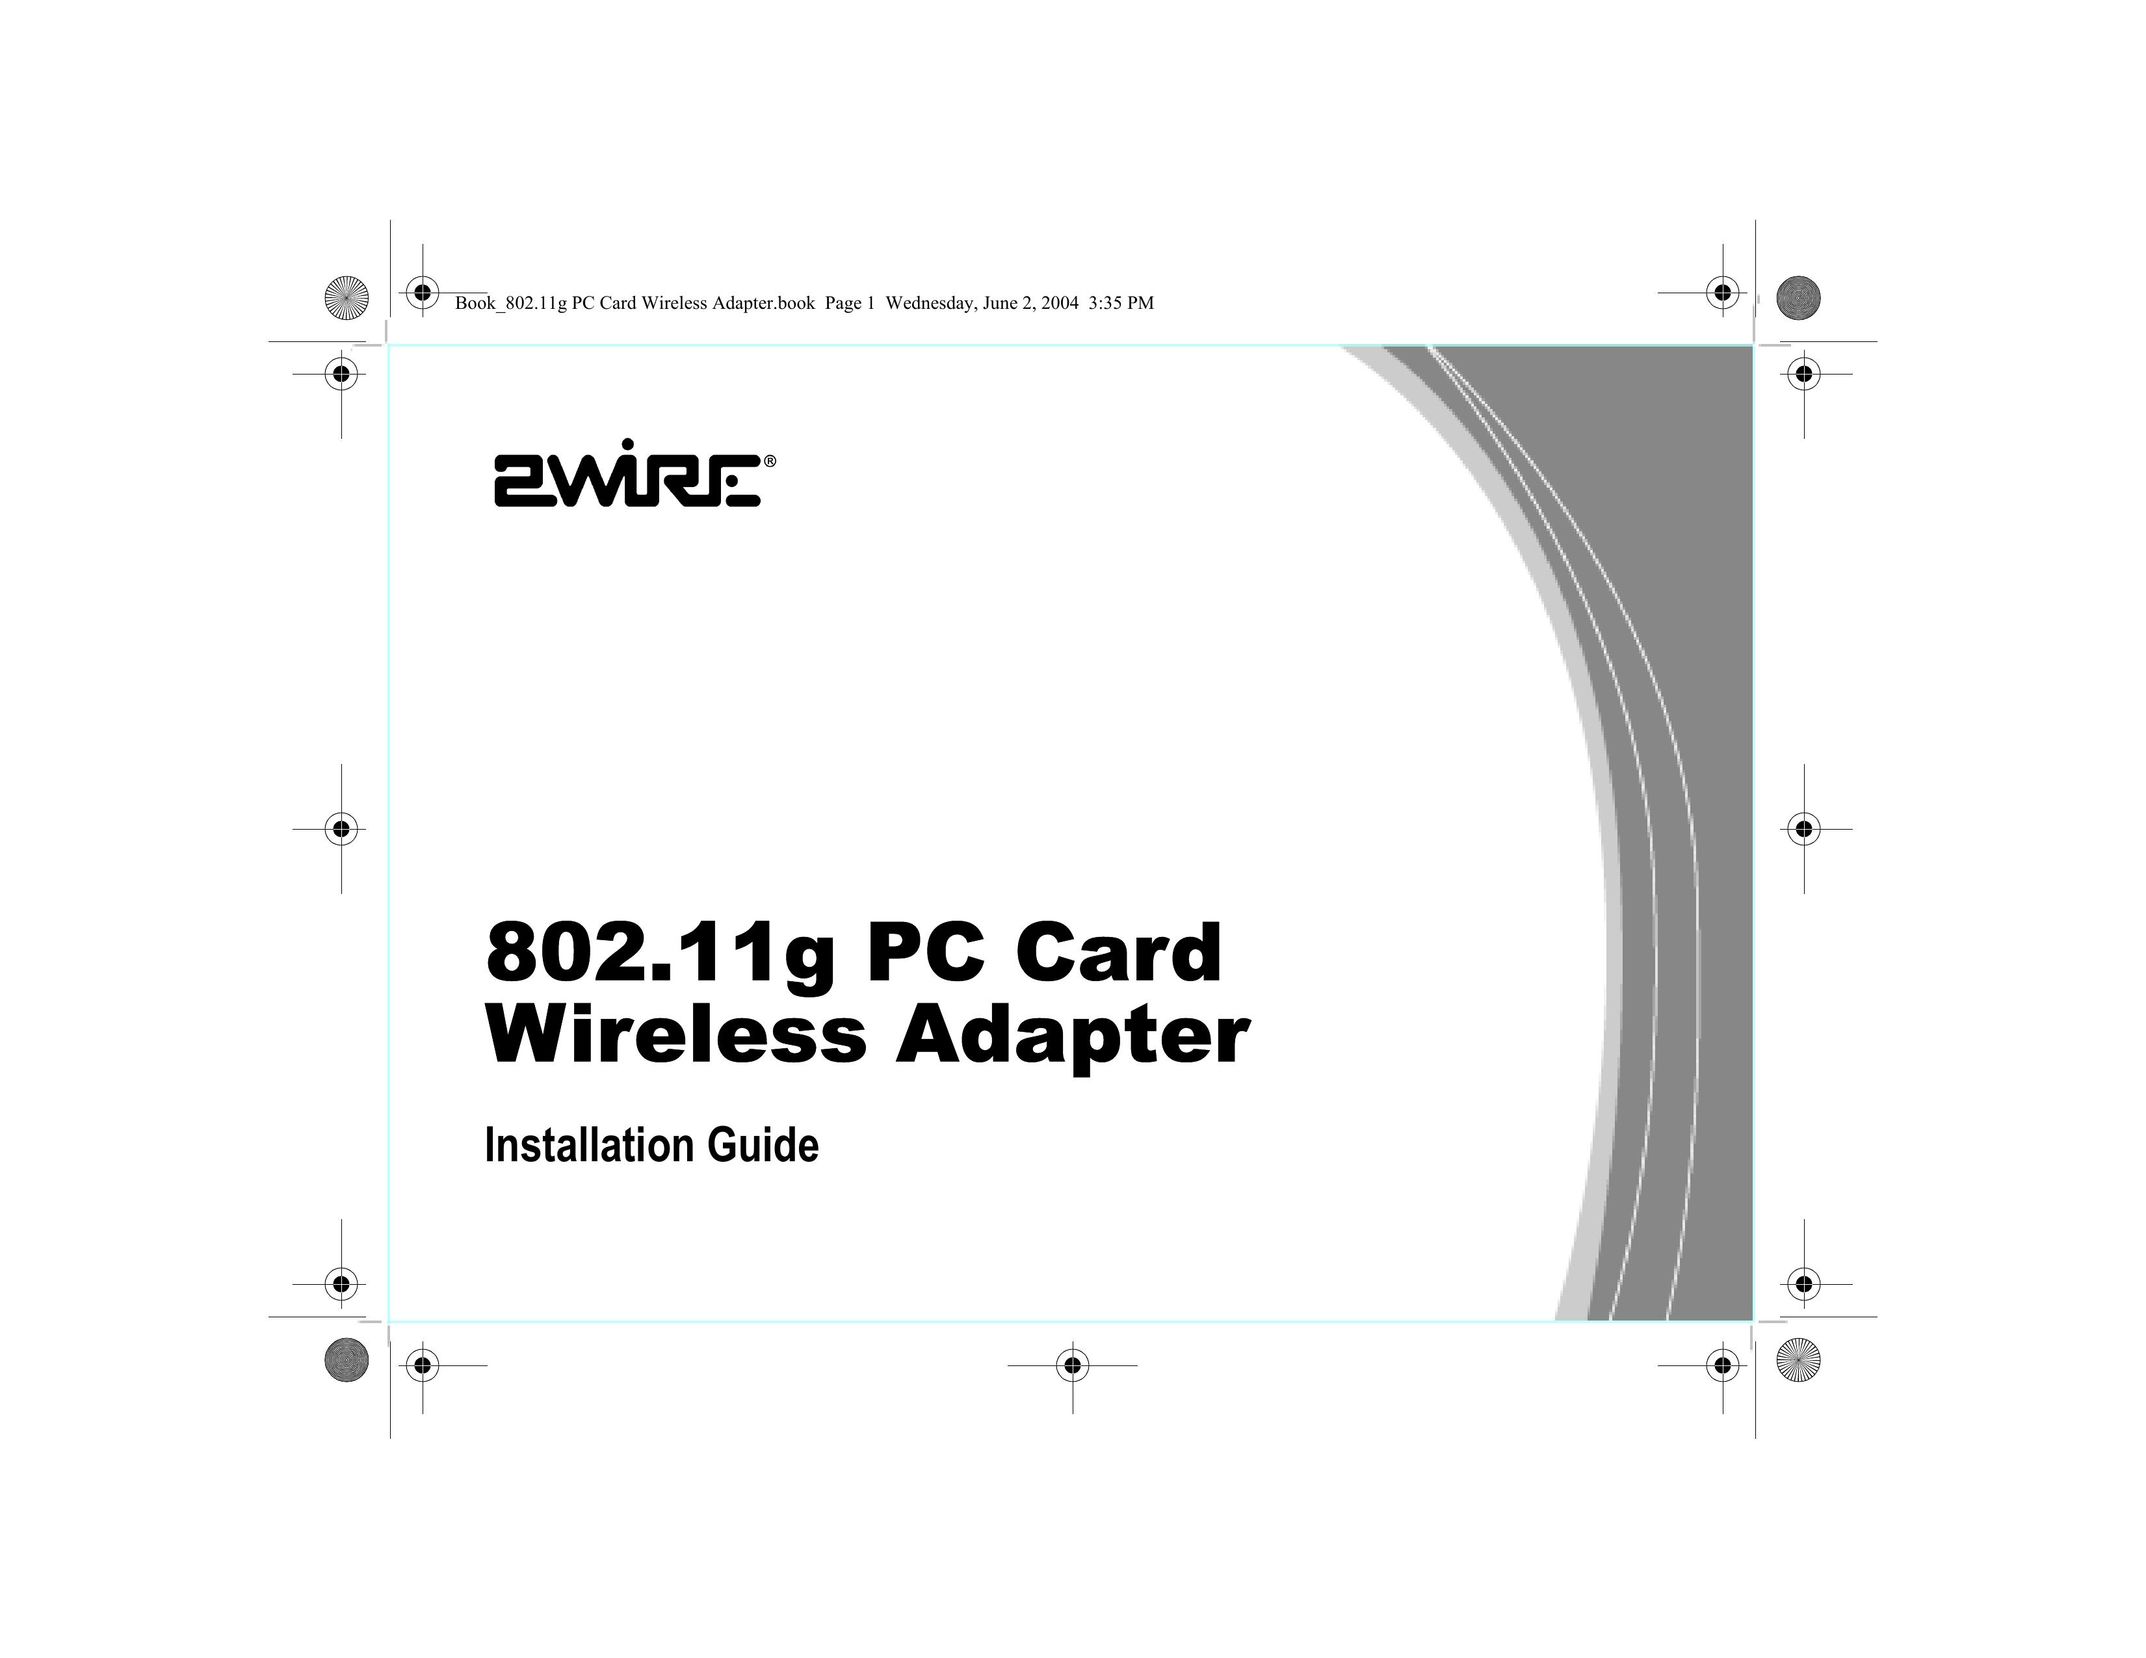 2Wire 802.11g Network Card User Manual